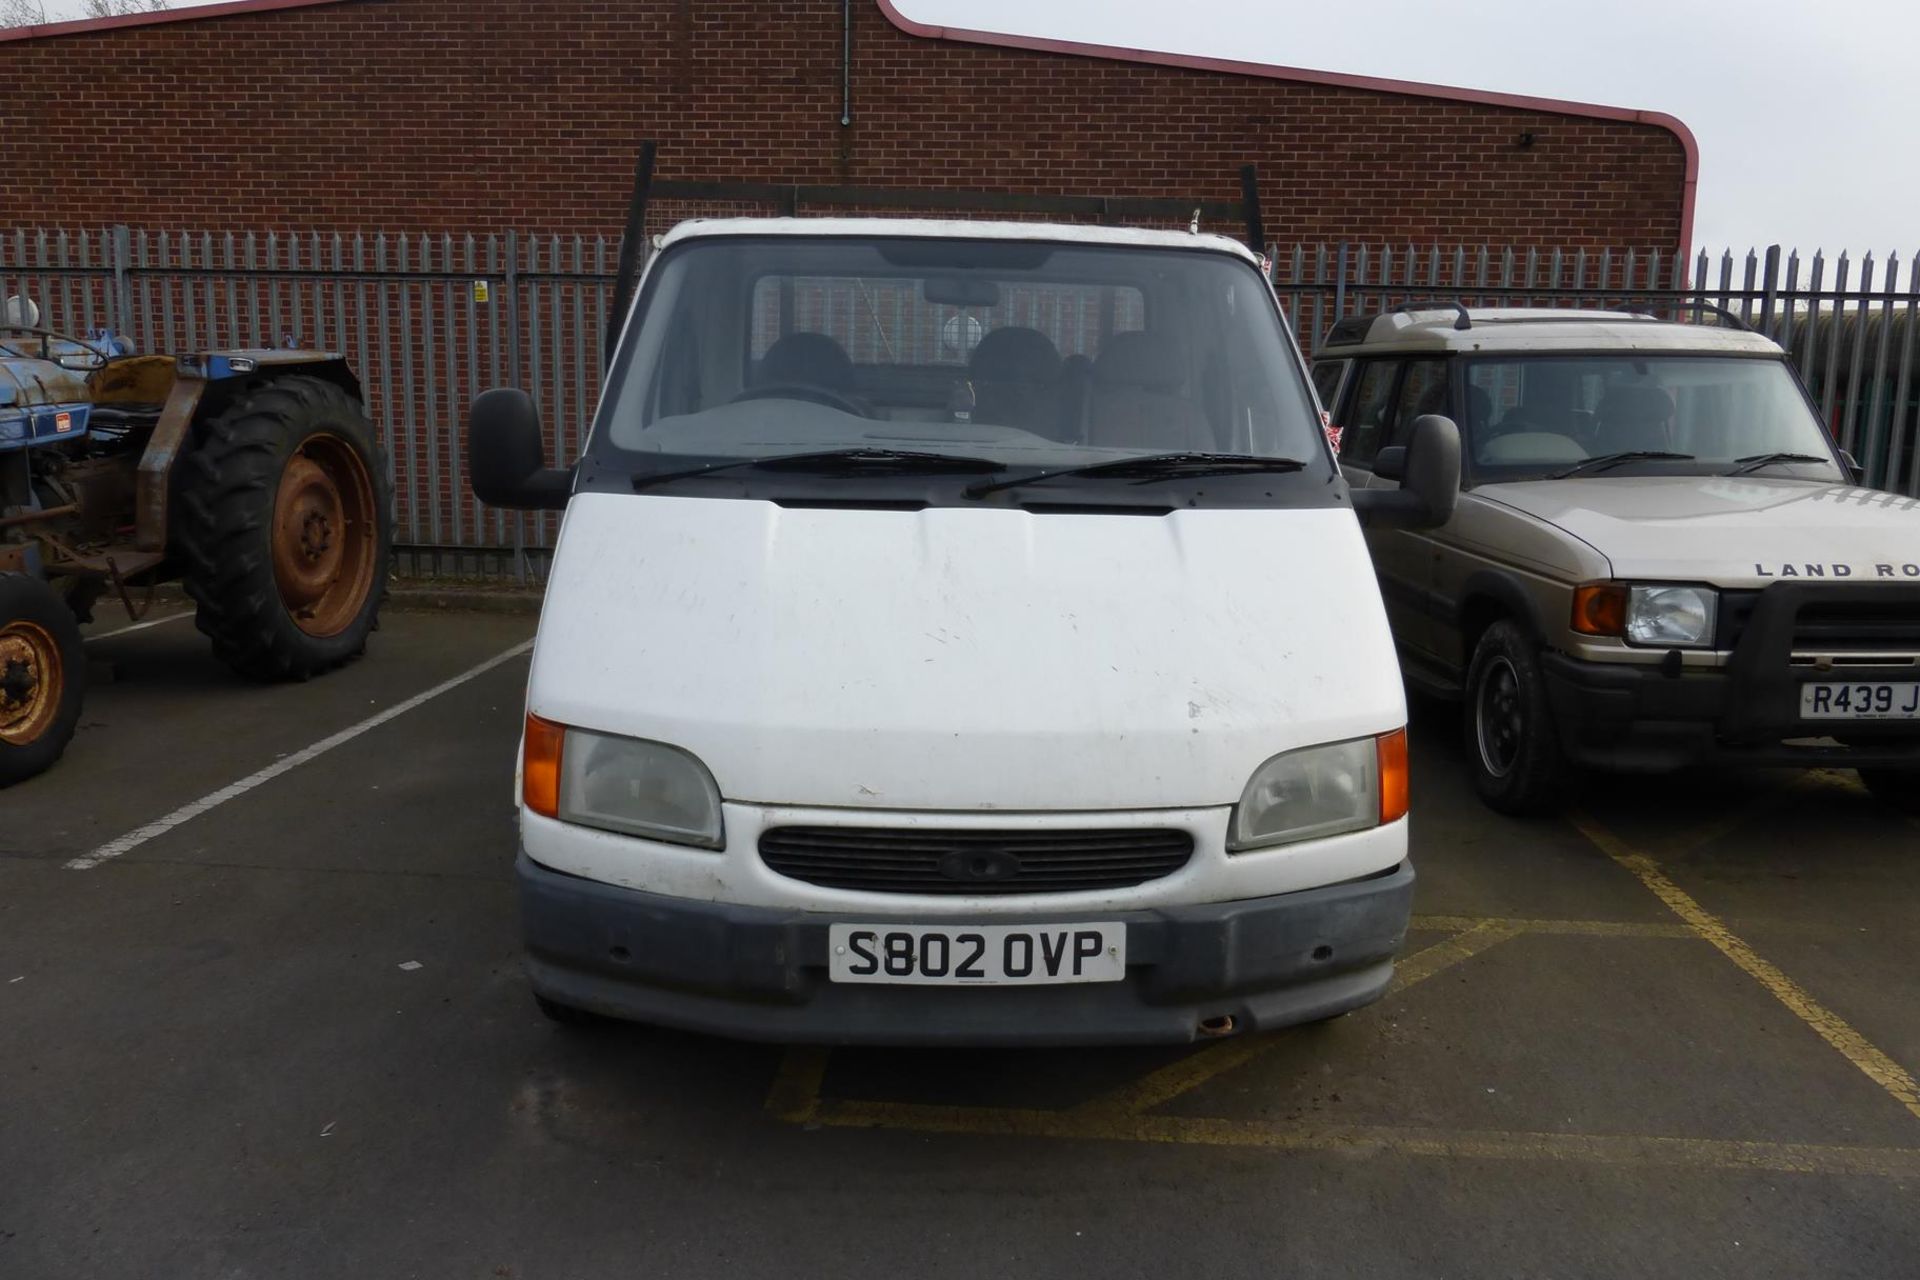 A Ford Transit Flatbed/Pickup in White 2496cc Diesel, Date of First Registration February 1999, - Image 4 of 10